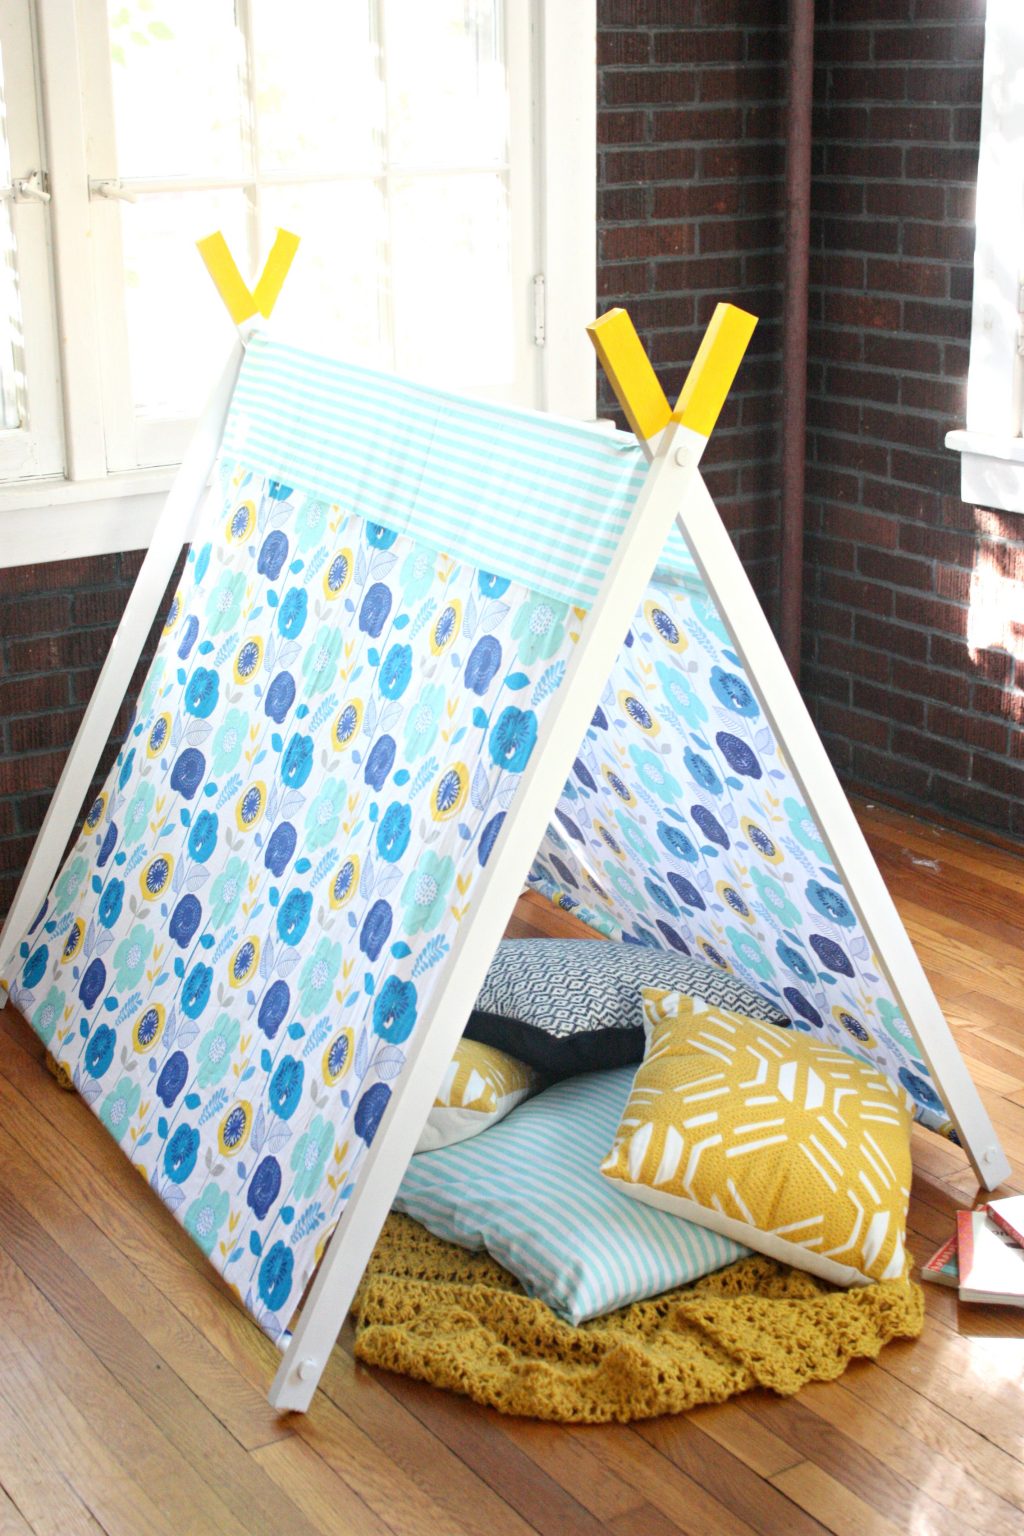 DIY Kids Play Tent | DIY Craft Projects | The Pretty Life Girls